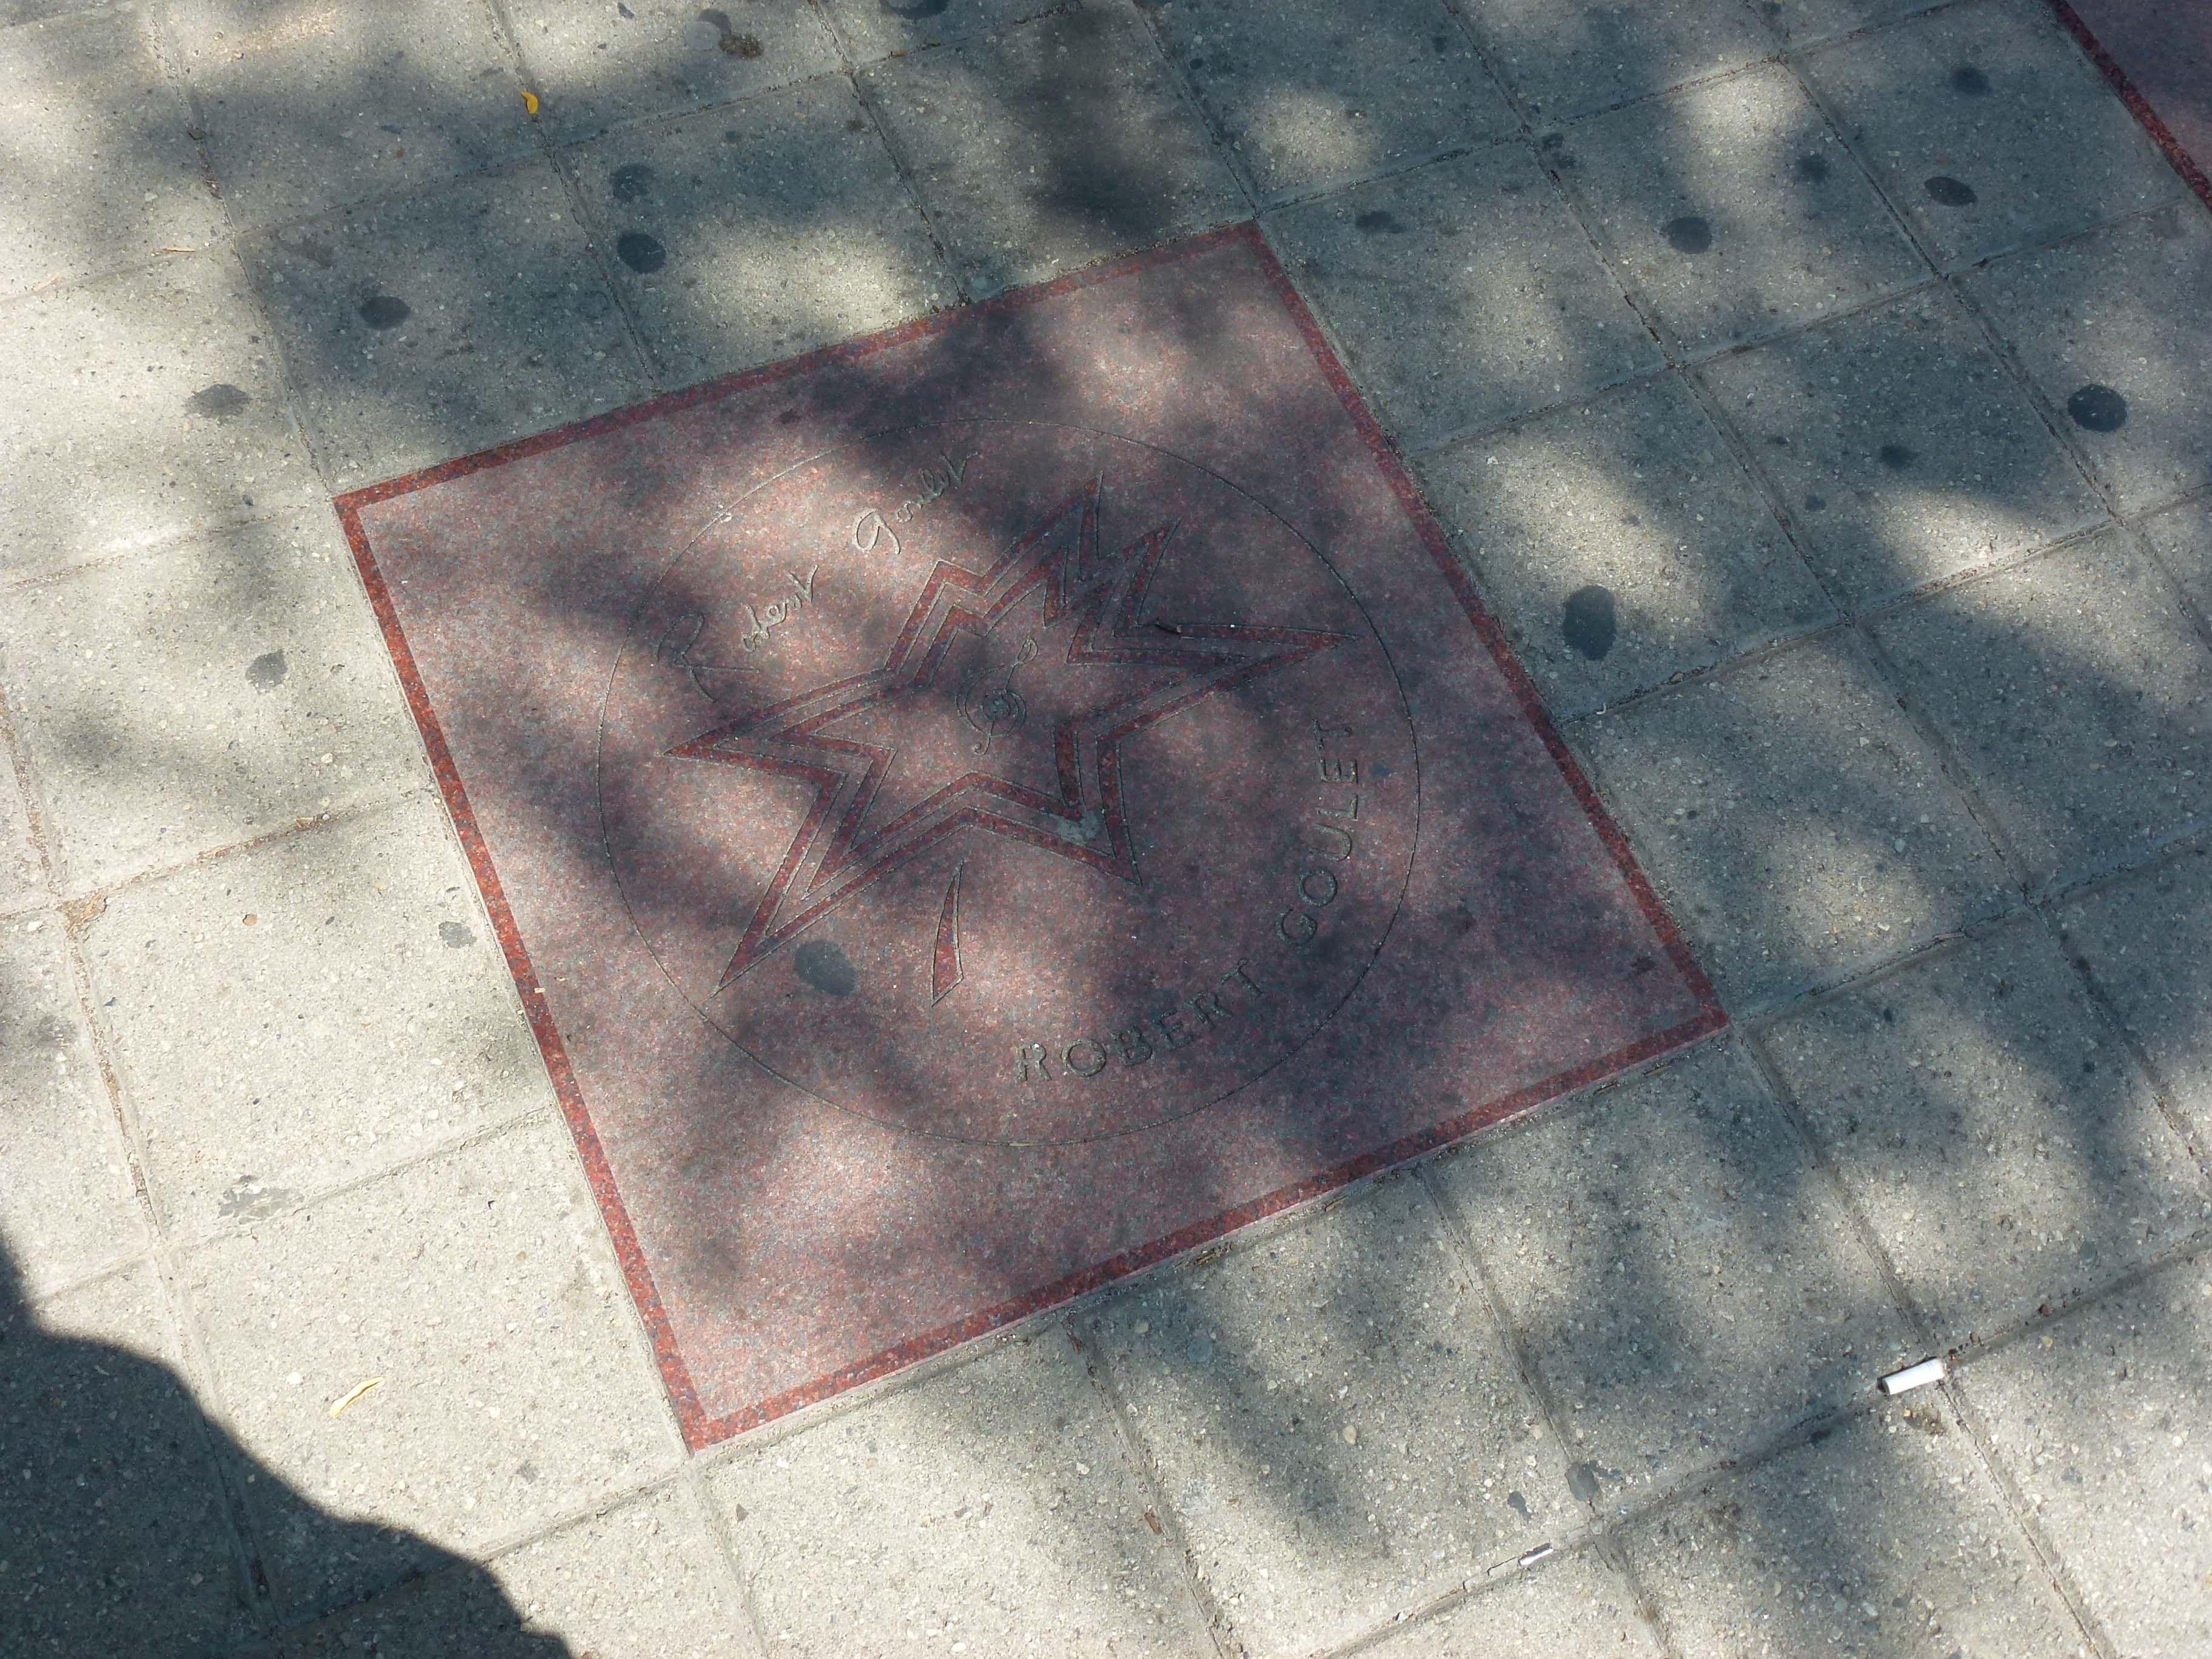 Canada's Walk of Fame on King Street in Toronto, Ontario, Canada